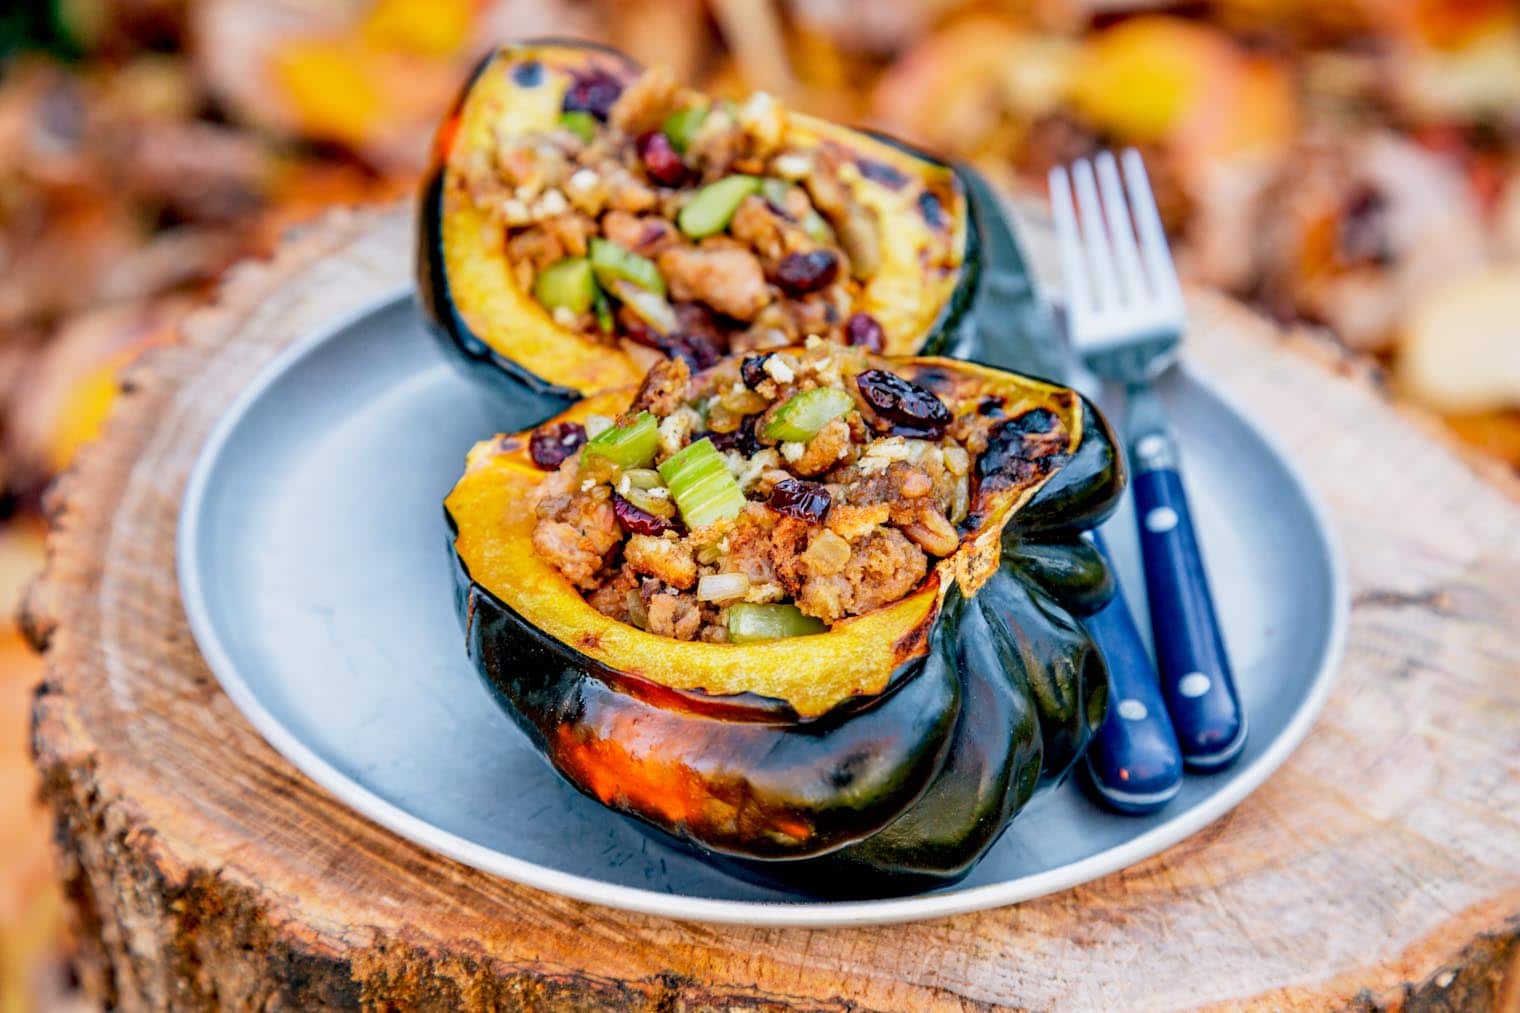 Two pieces of Roasted stuffed squash on a plate